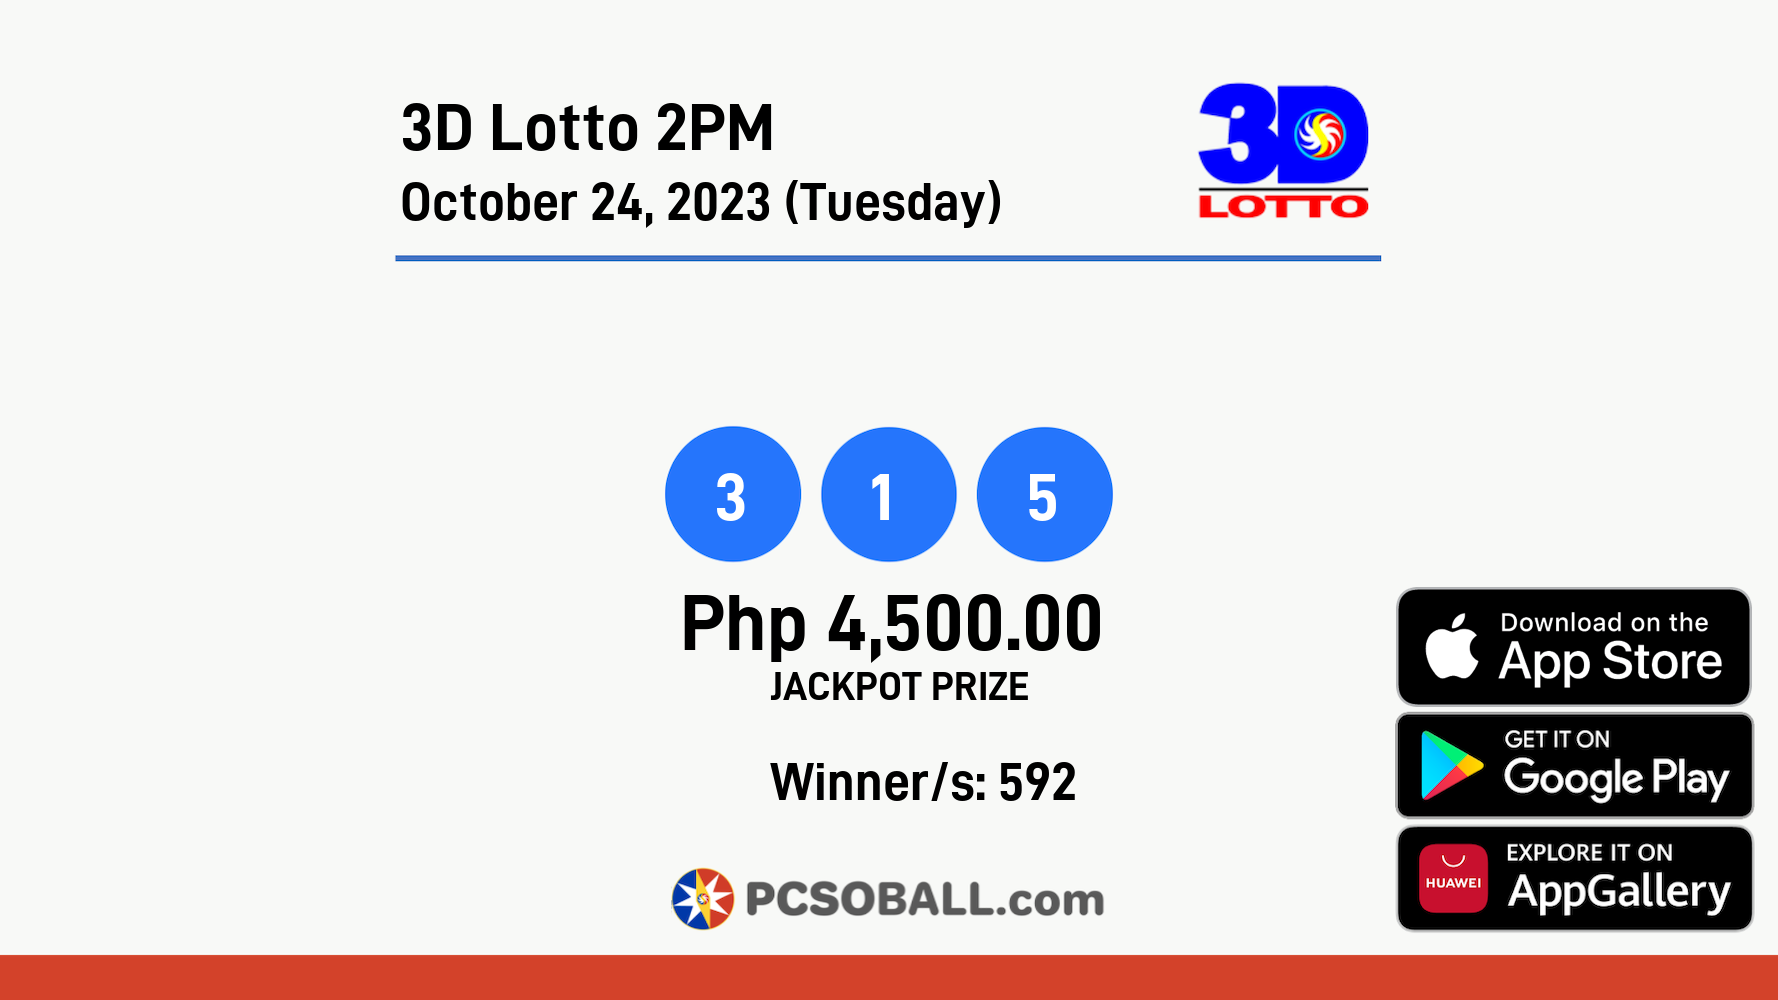 3D Lotto 2PM October 24, 2023 (Tuesday) Result